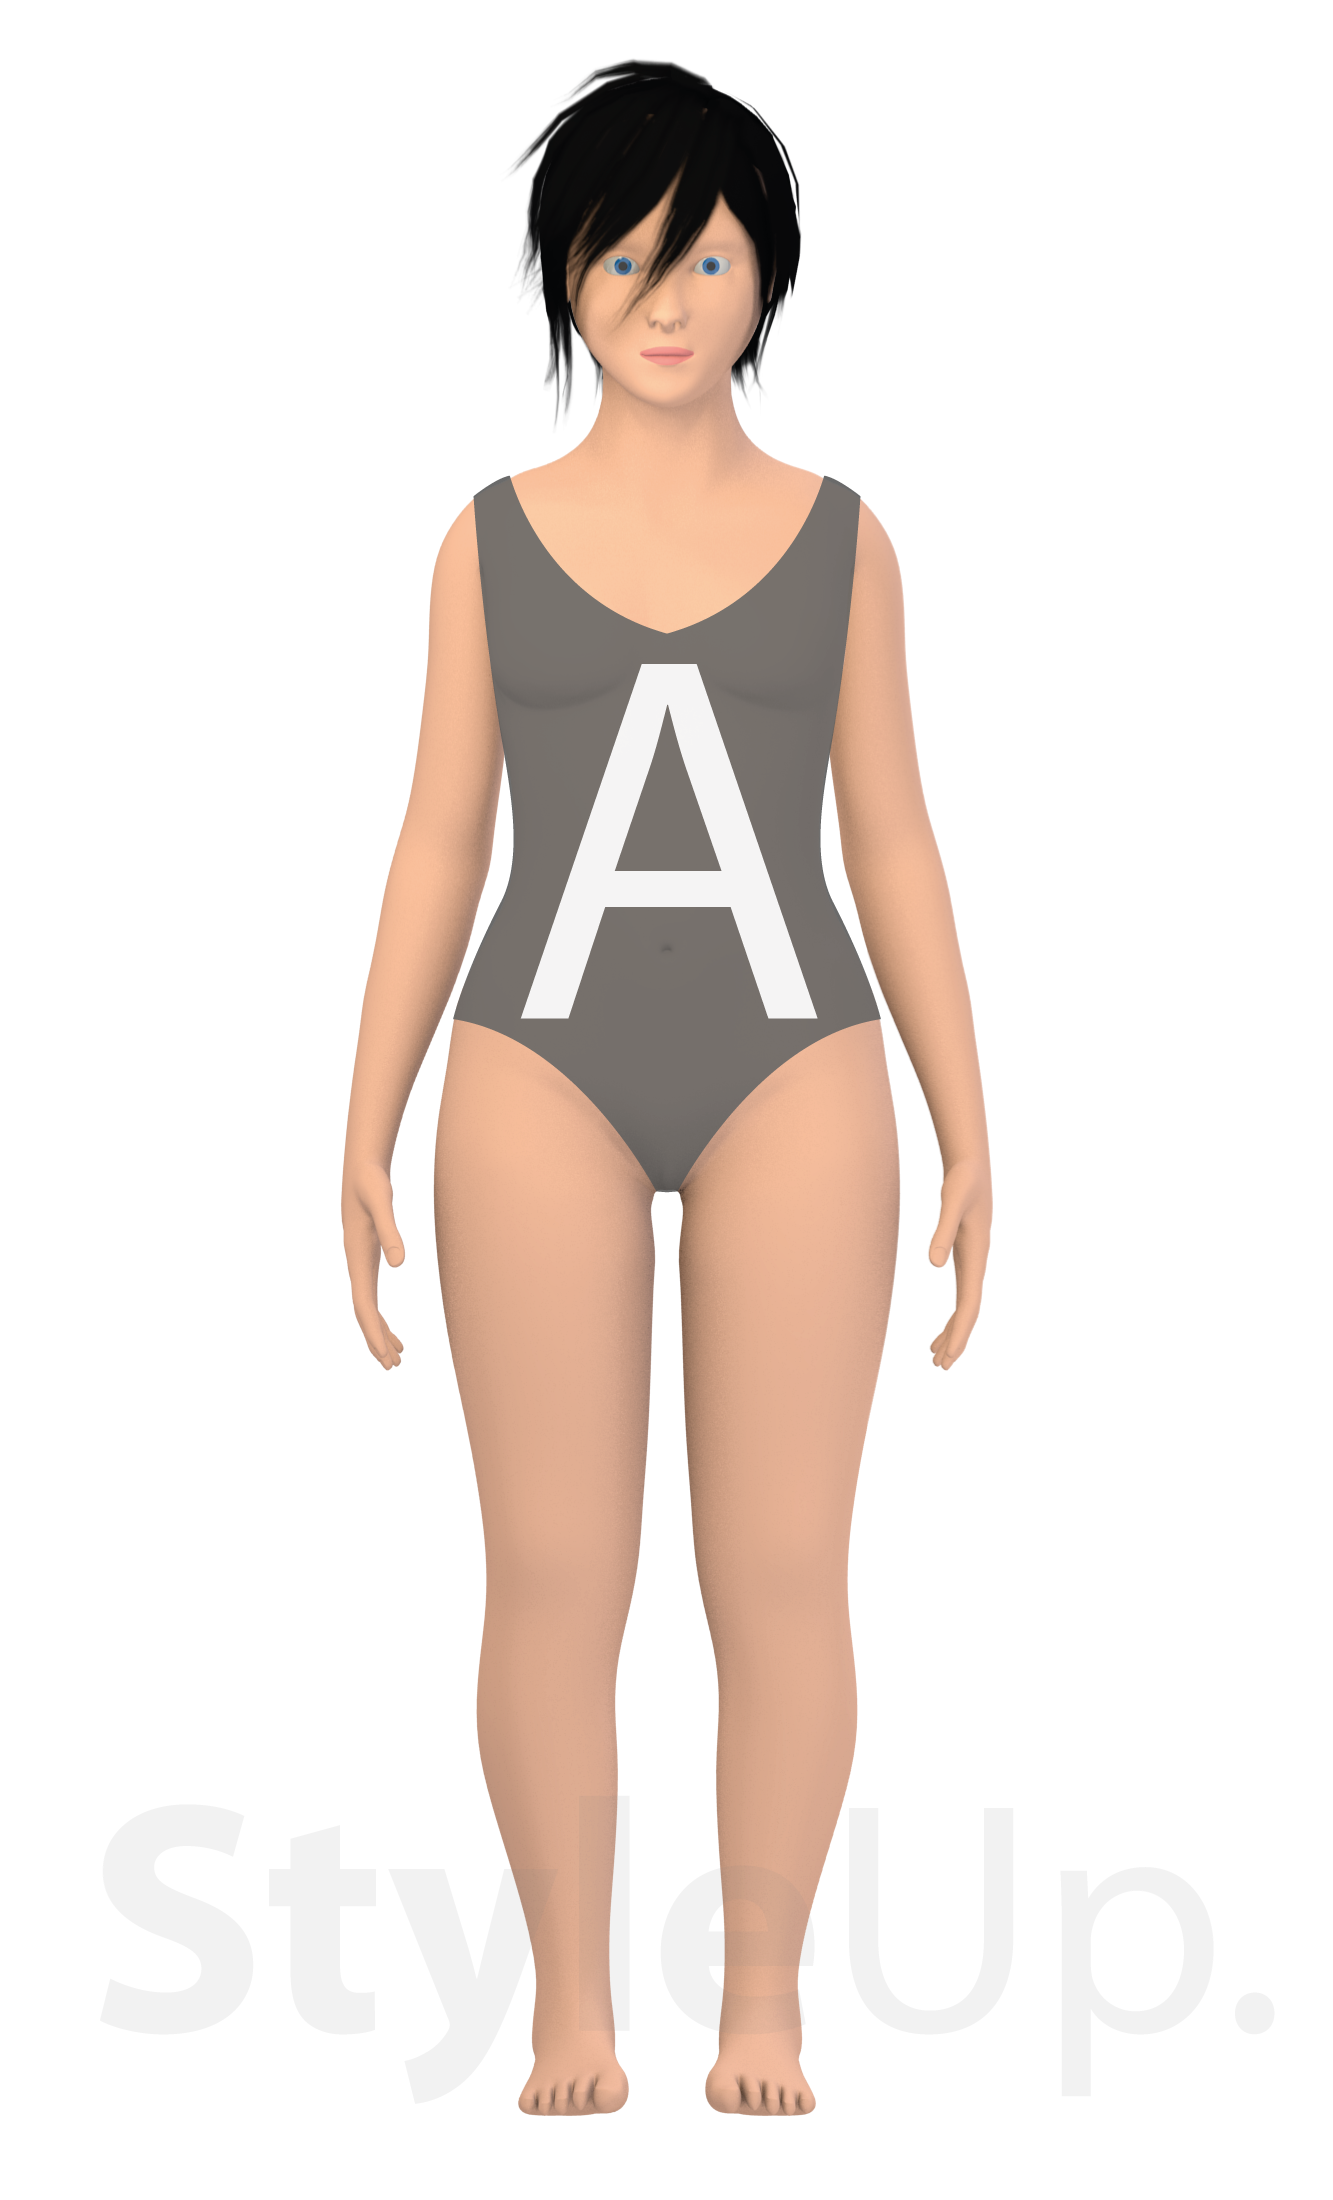 StyleUp_Female_Bodytype_A.png